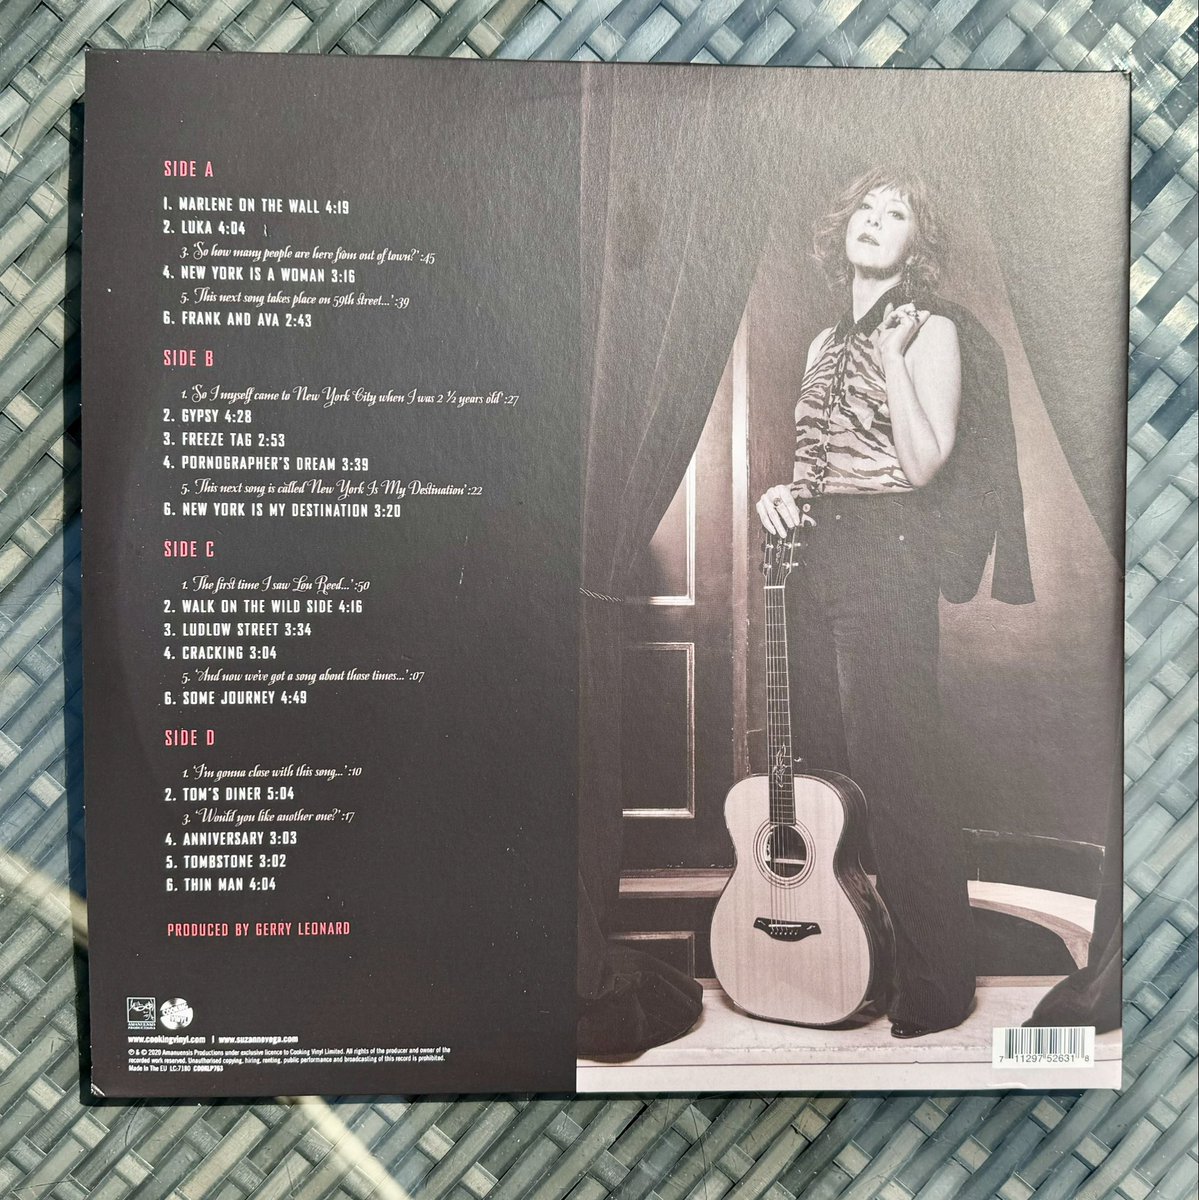 The last of my birthday presents from @DiDee19_ 🎁 The brilliant live #SuzanneVega double album ‘An Evening of New York Songs and Stories’ recorded at the Café Carlyle. @suzyv 💛❤️